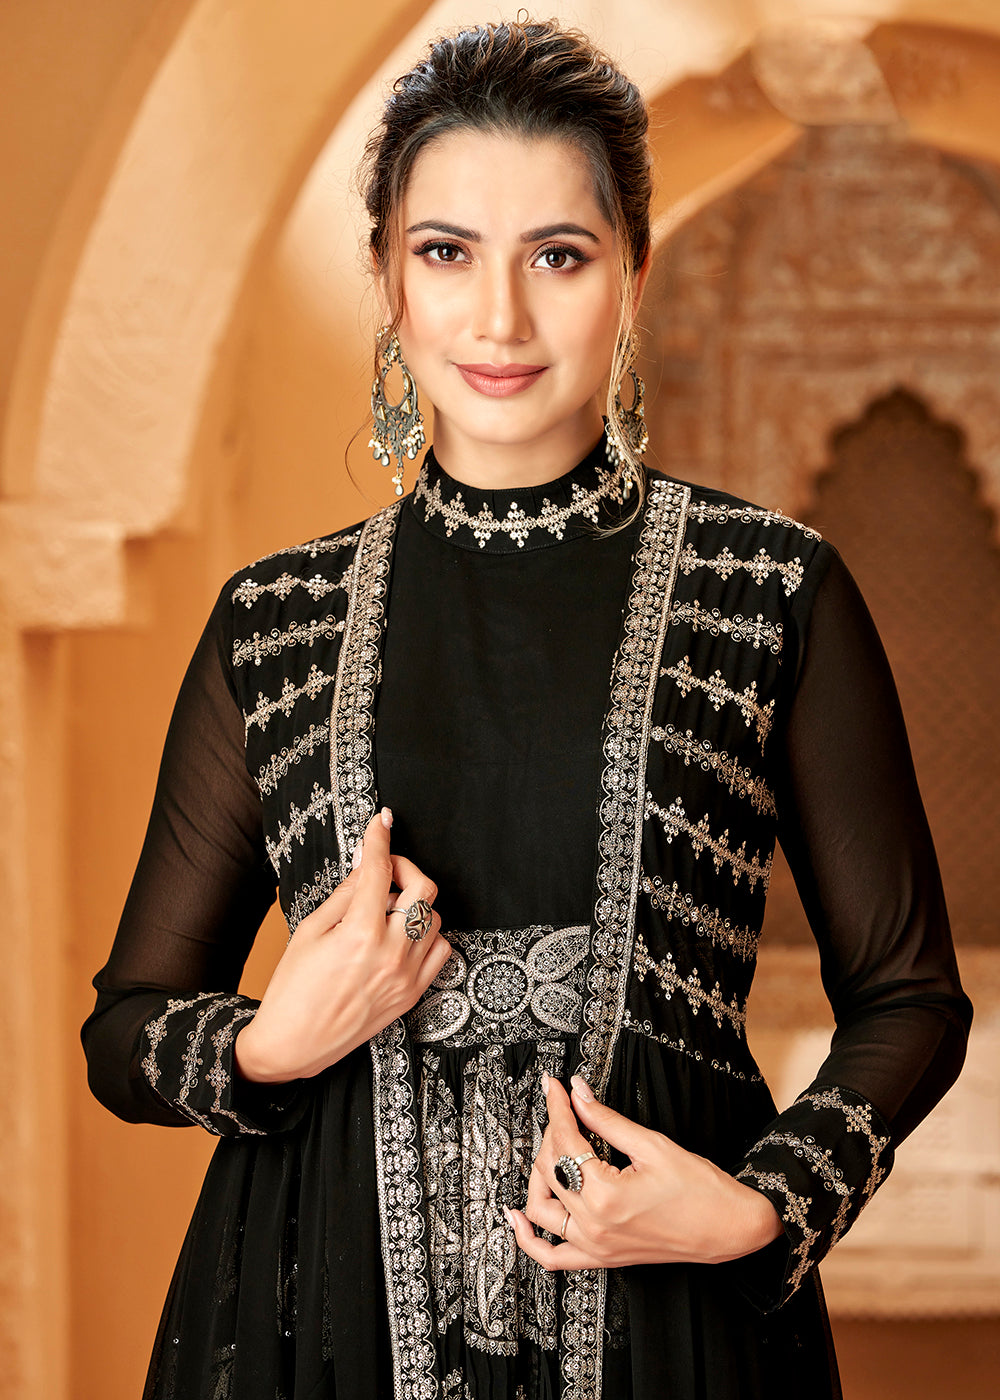 Buy Now Party Wear Divine Charcoal Black Jacket Style Anarkali Dress Online in USA, UK, Australia, New Zealand, Canada & Worldwide at Empress Clothing.